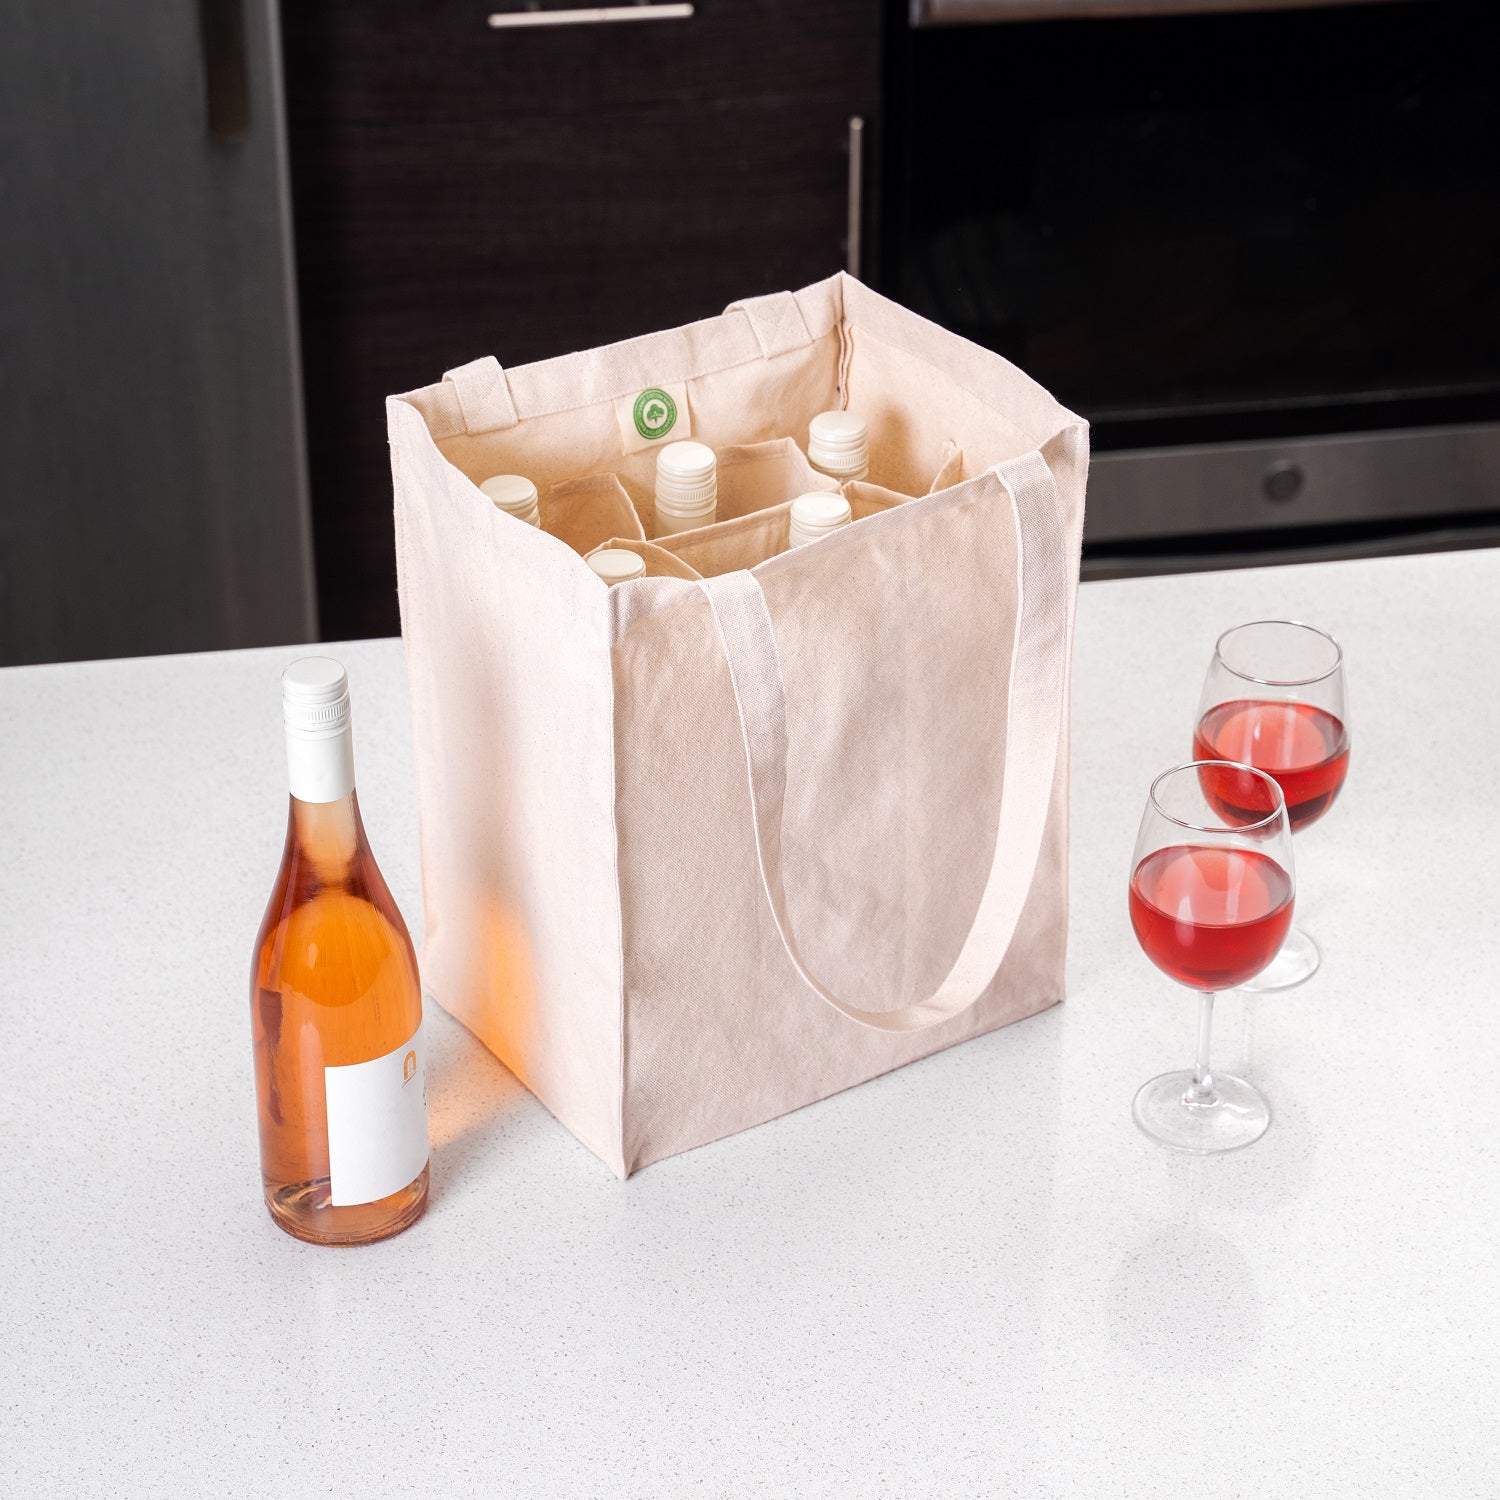 Wine Tote Bags - 6-Pack Wine Carrying Bag Set, Ideal Bottle Gift